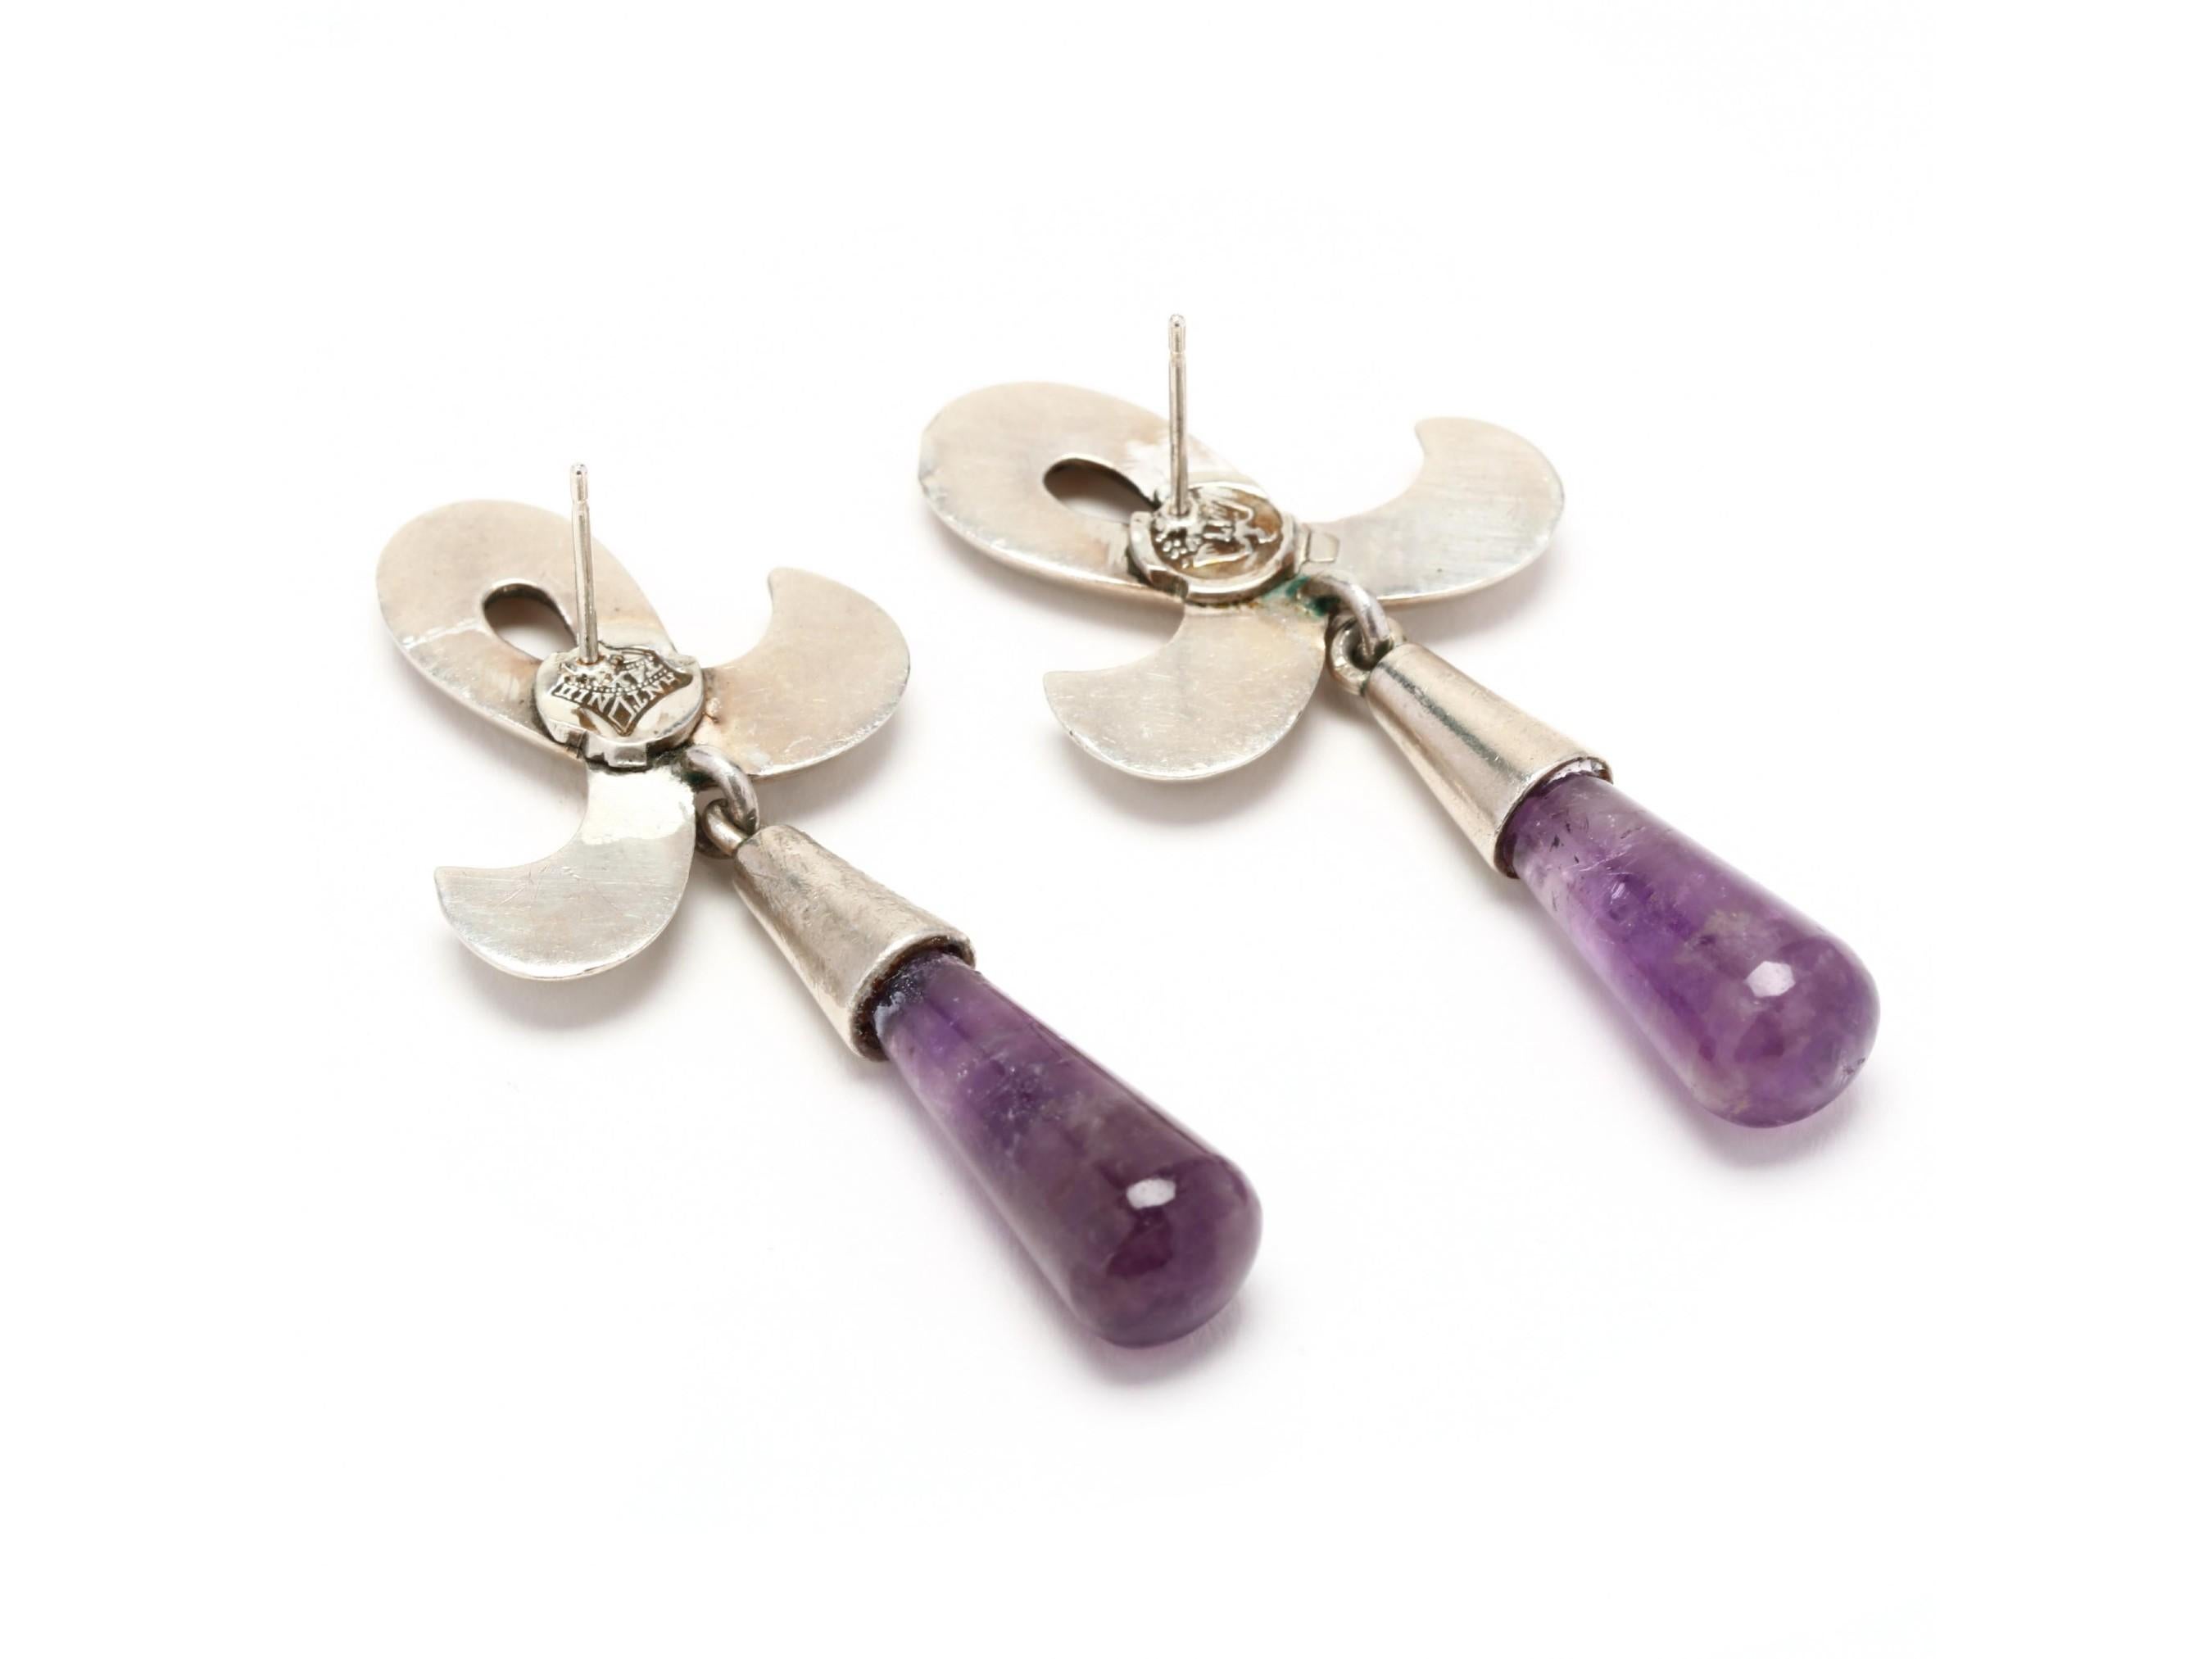 Absolutely beautiful, modernist work of wearable art by Taxco, Mexico master silversmith Antonio Pineda! These circa 1960s earrings have a well-balanced composition of a fleur-de-lis ribbon surmount with elongated teardrop amethyst cabochon dangles